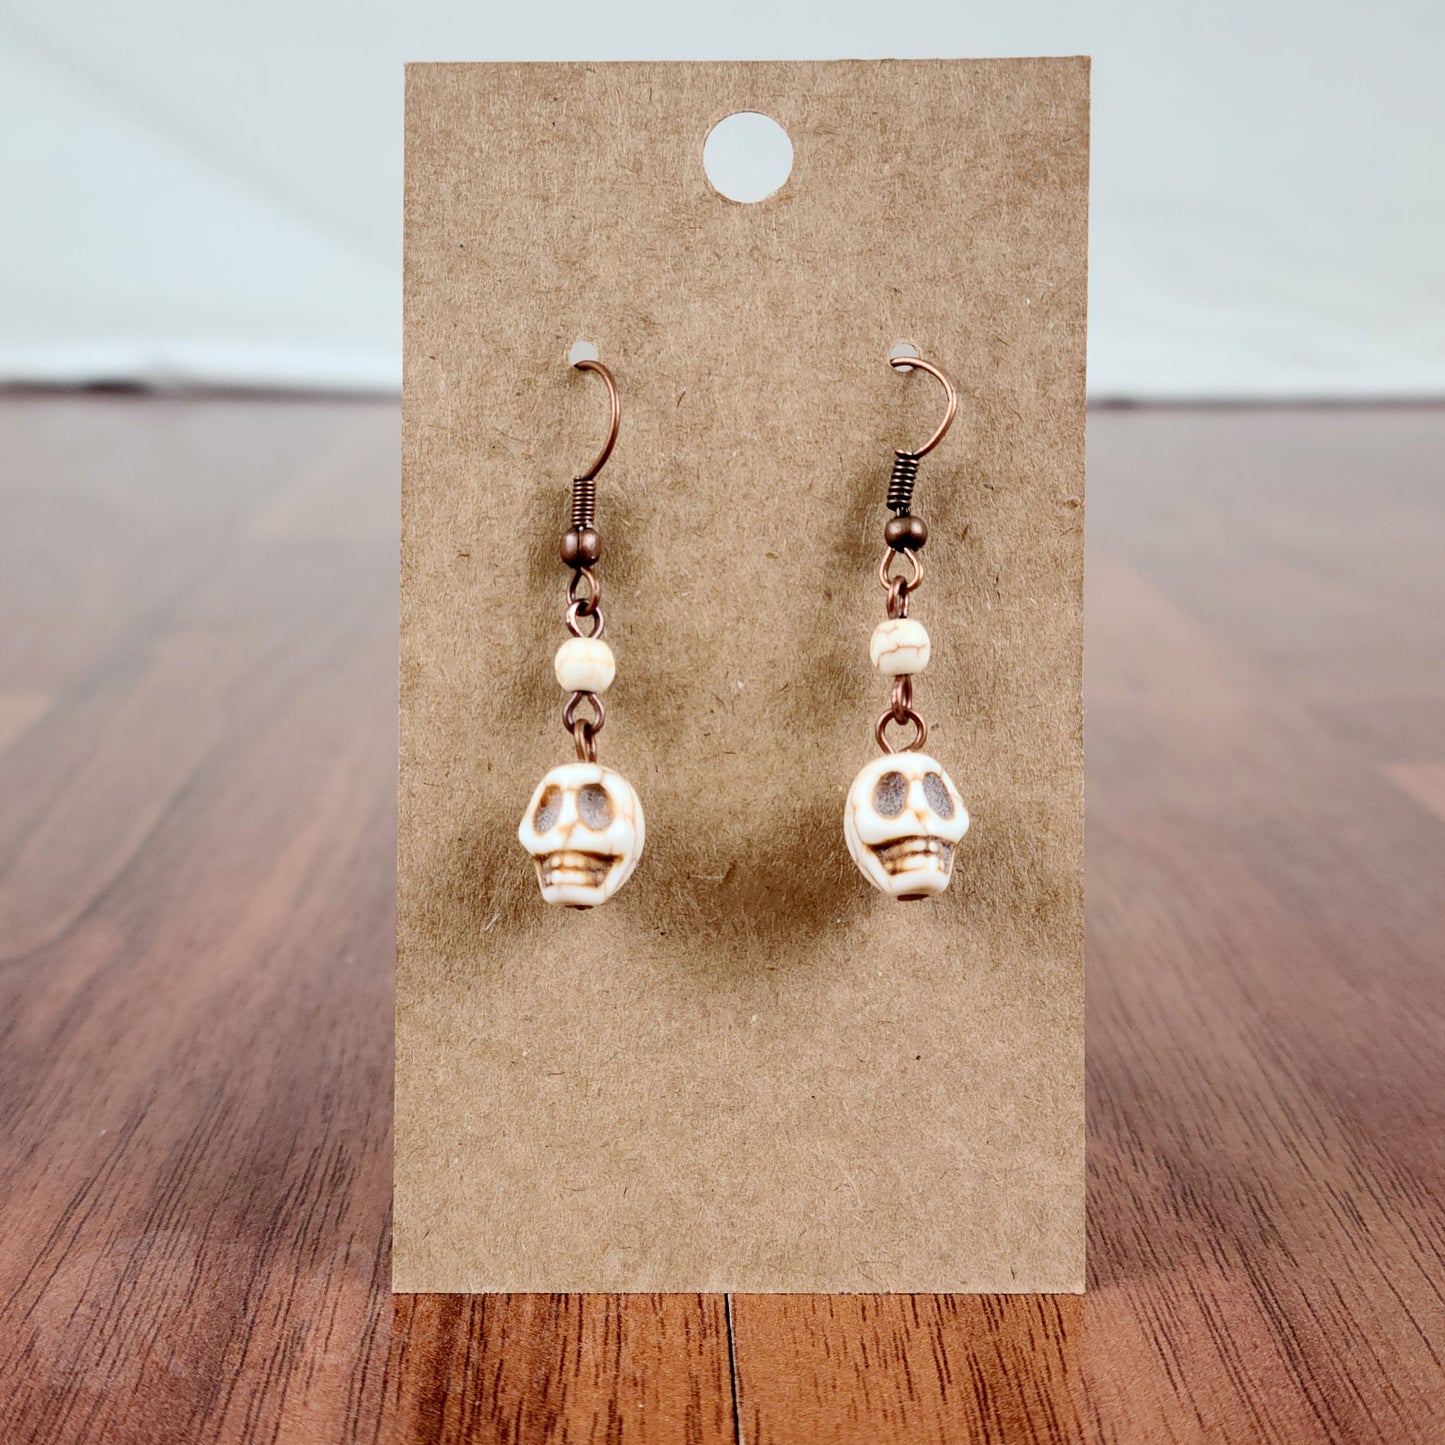 Drop earrings with white stone skulls and round beads, and antique copper hardware